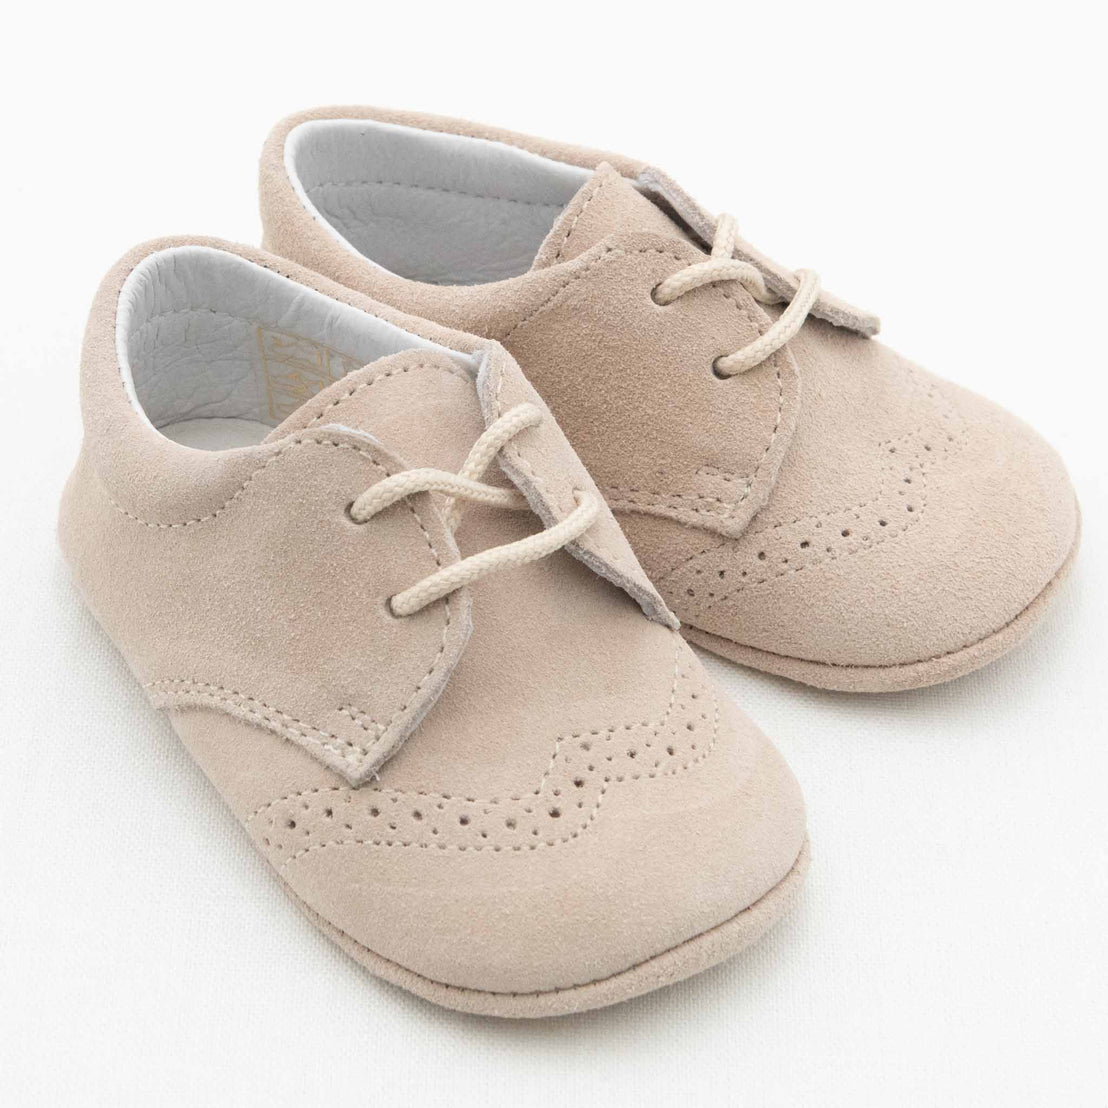 A pair of Ian Suede Shoes in light tan, crafted from soft suede material with white interiors. These baby boys' shoes feature decorative broguing on the toes and vamps, secured with white laces. The handmade suede shoes are placed on a white background.